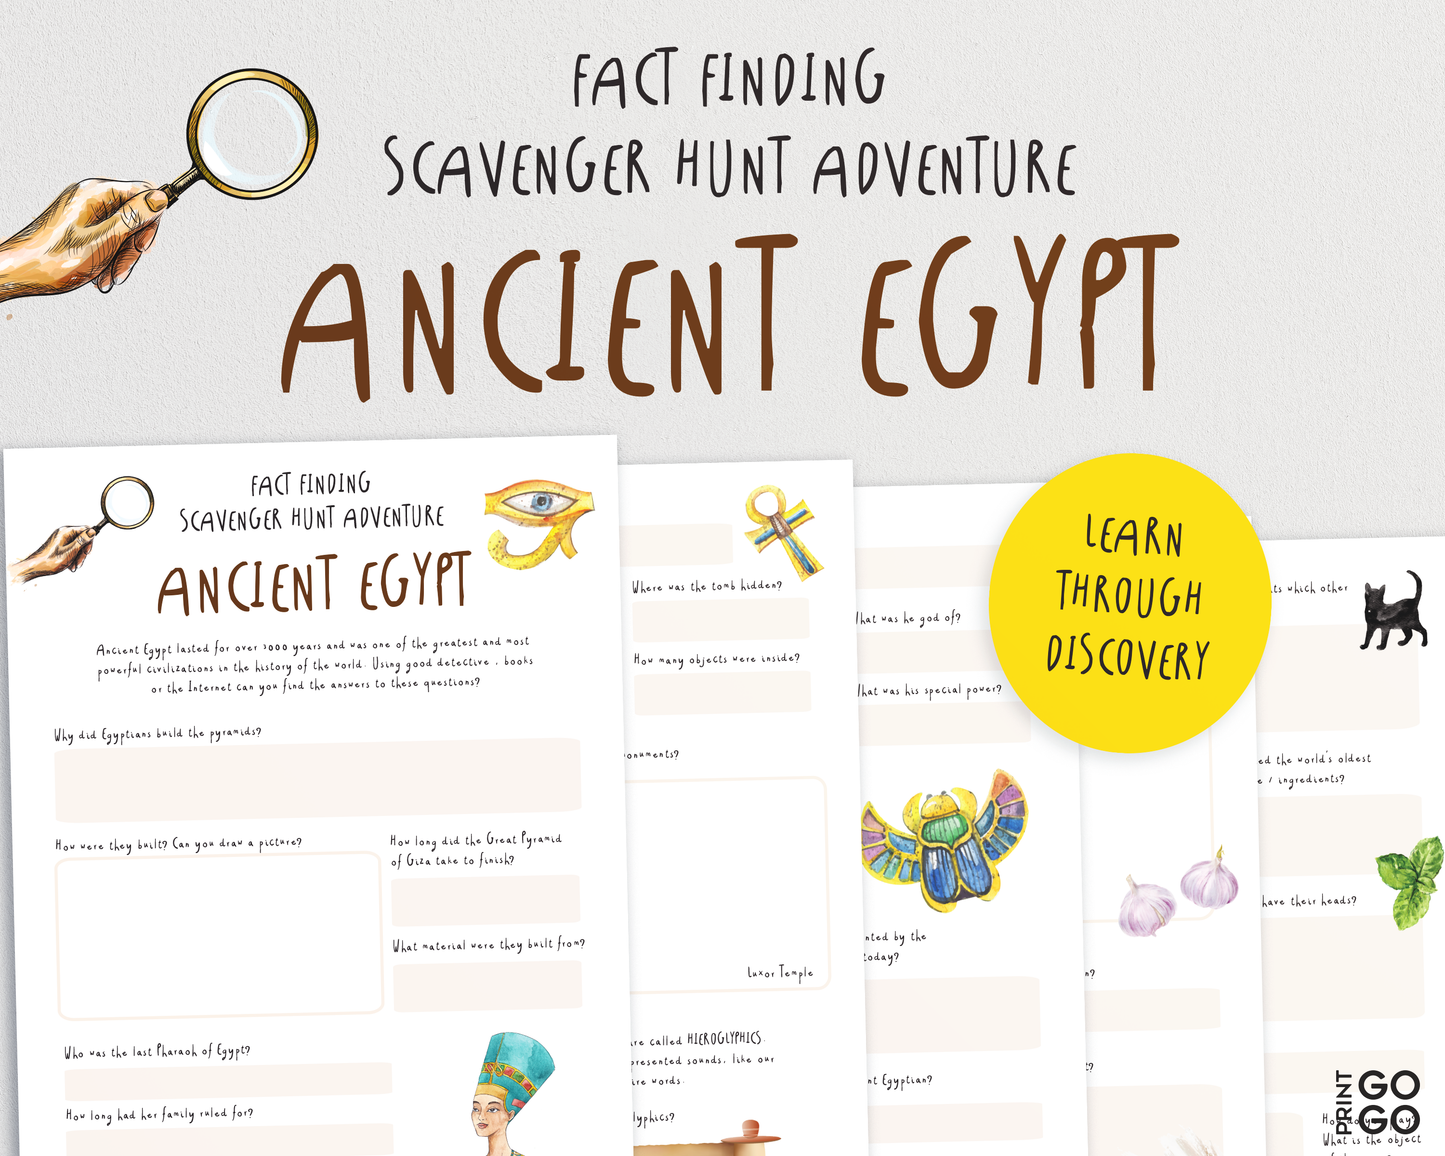 Ancient Egypt - A Fact Finding Scavenger Hunt Adventure for Kids